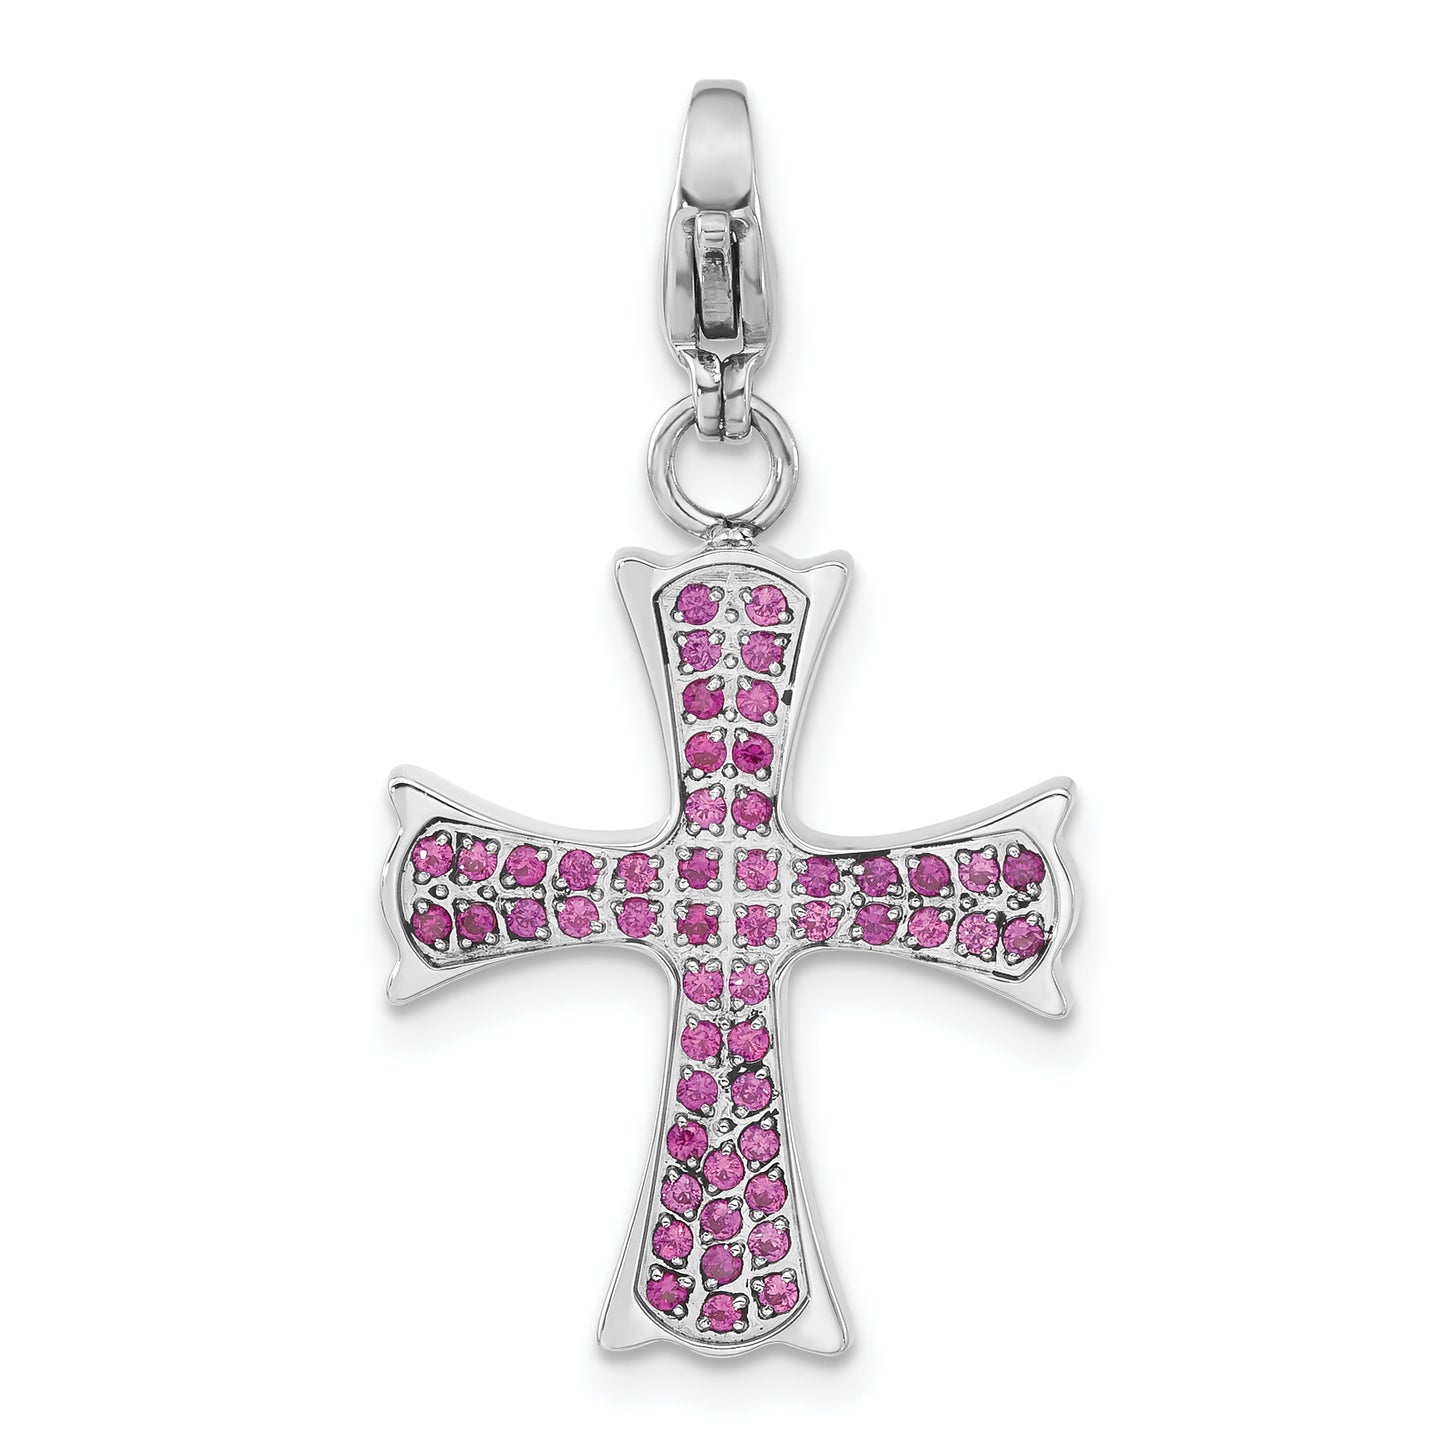 Stainless Steel Polished Dark Pink CZ Cross with Lobster Clasp Charm